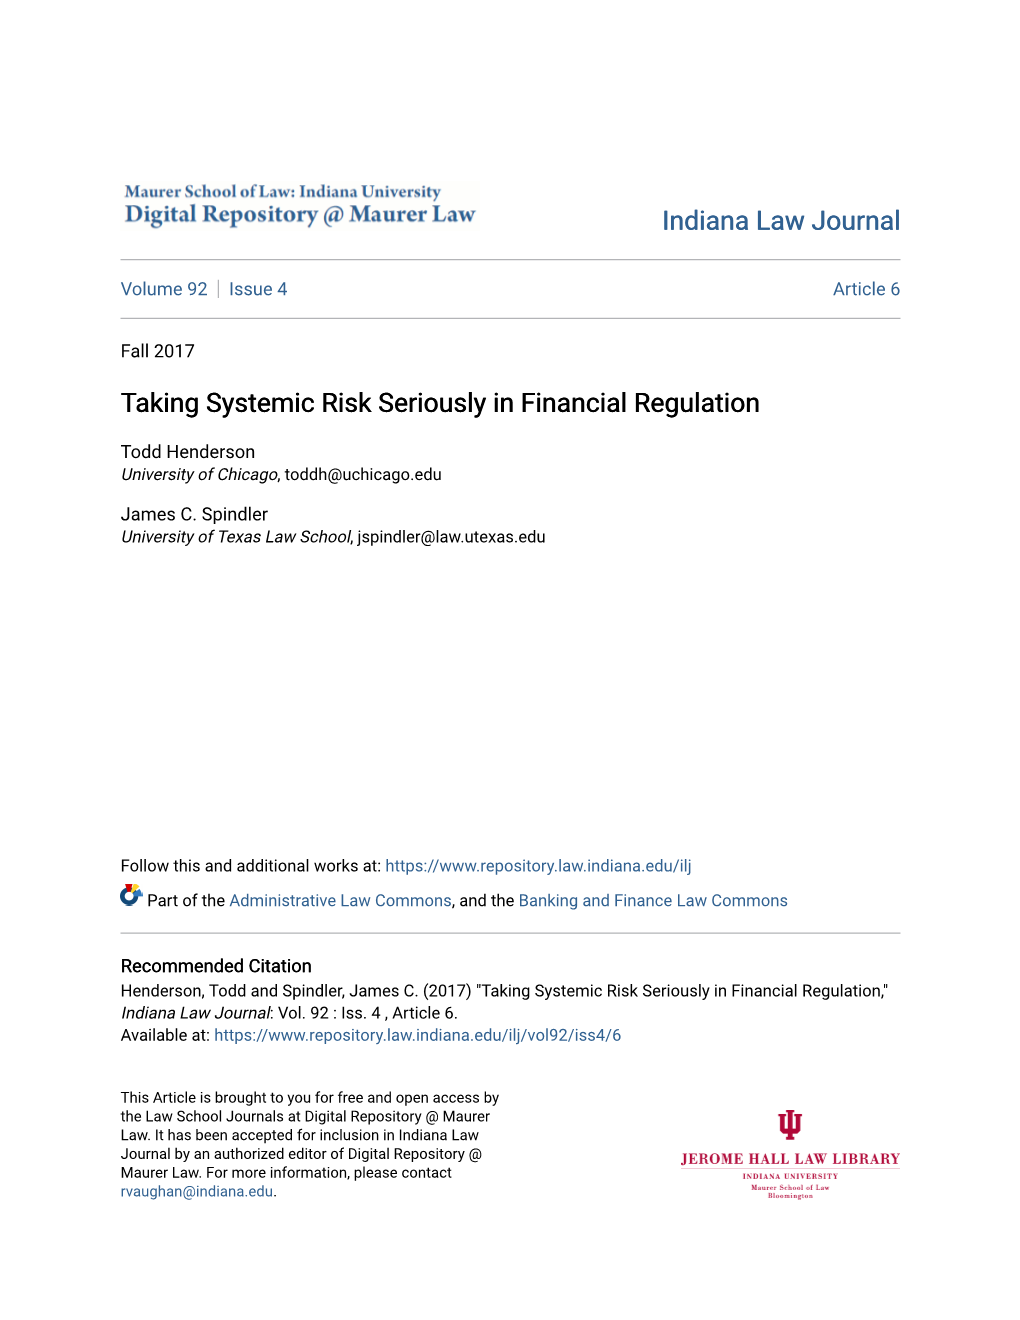 Taking Systemic Risk Seriously in Financial Regulation